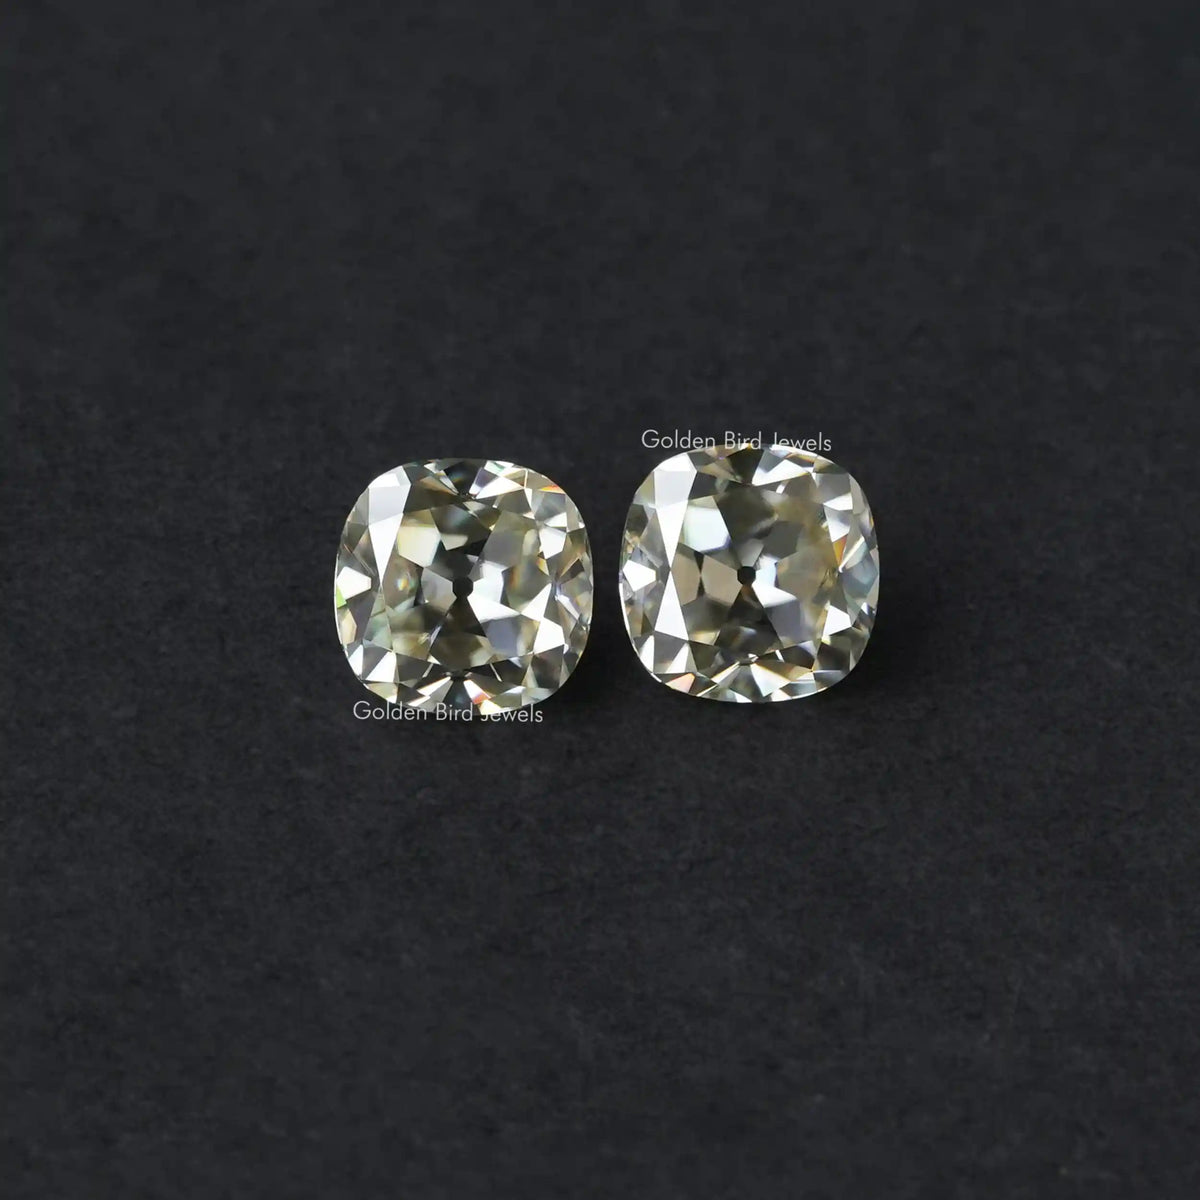 [This cushion cut matching pair loose stones made of vs clarity]-[Golden Bird Jewels]